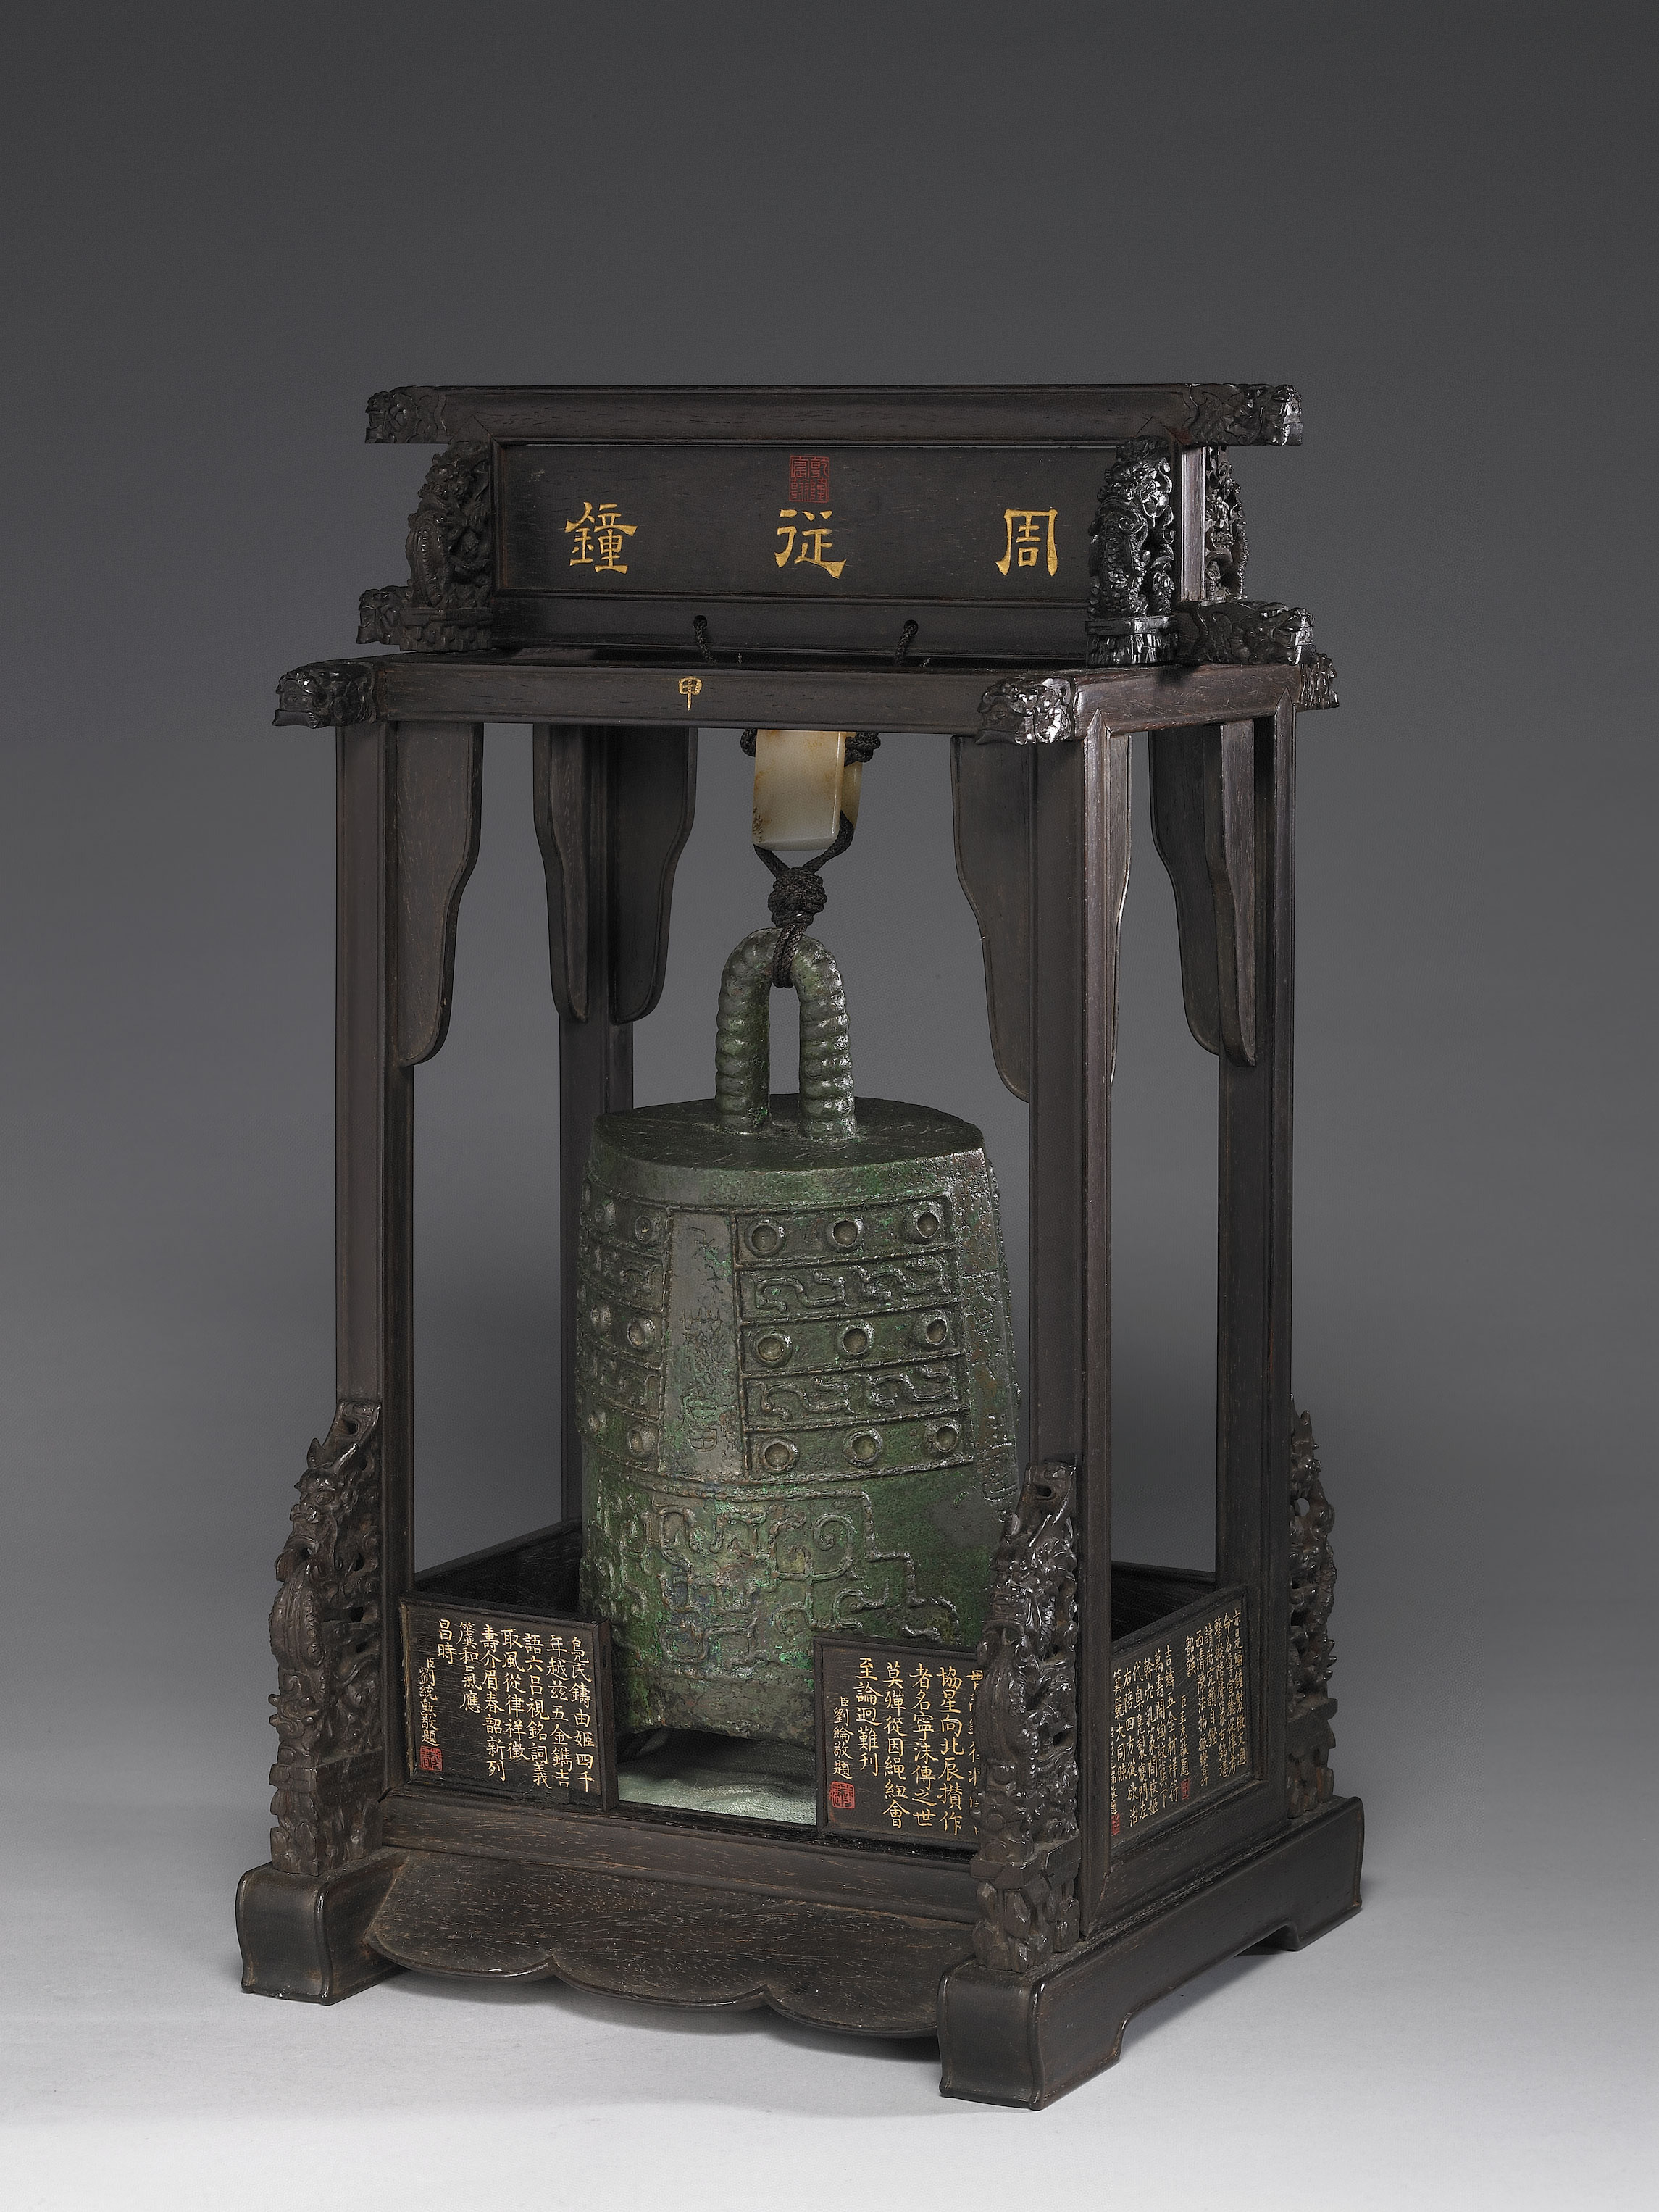 Zhutaizai bell, with red sandalwood frame made in Qianlong reign, Qing dynasty